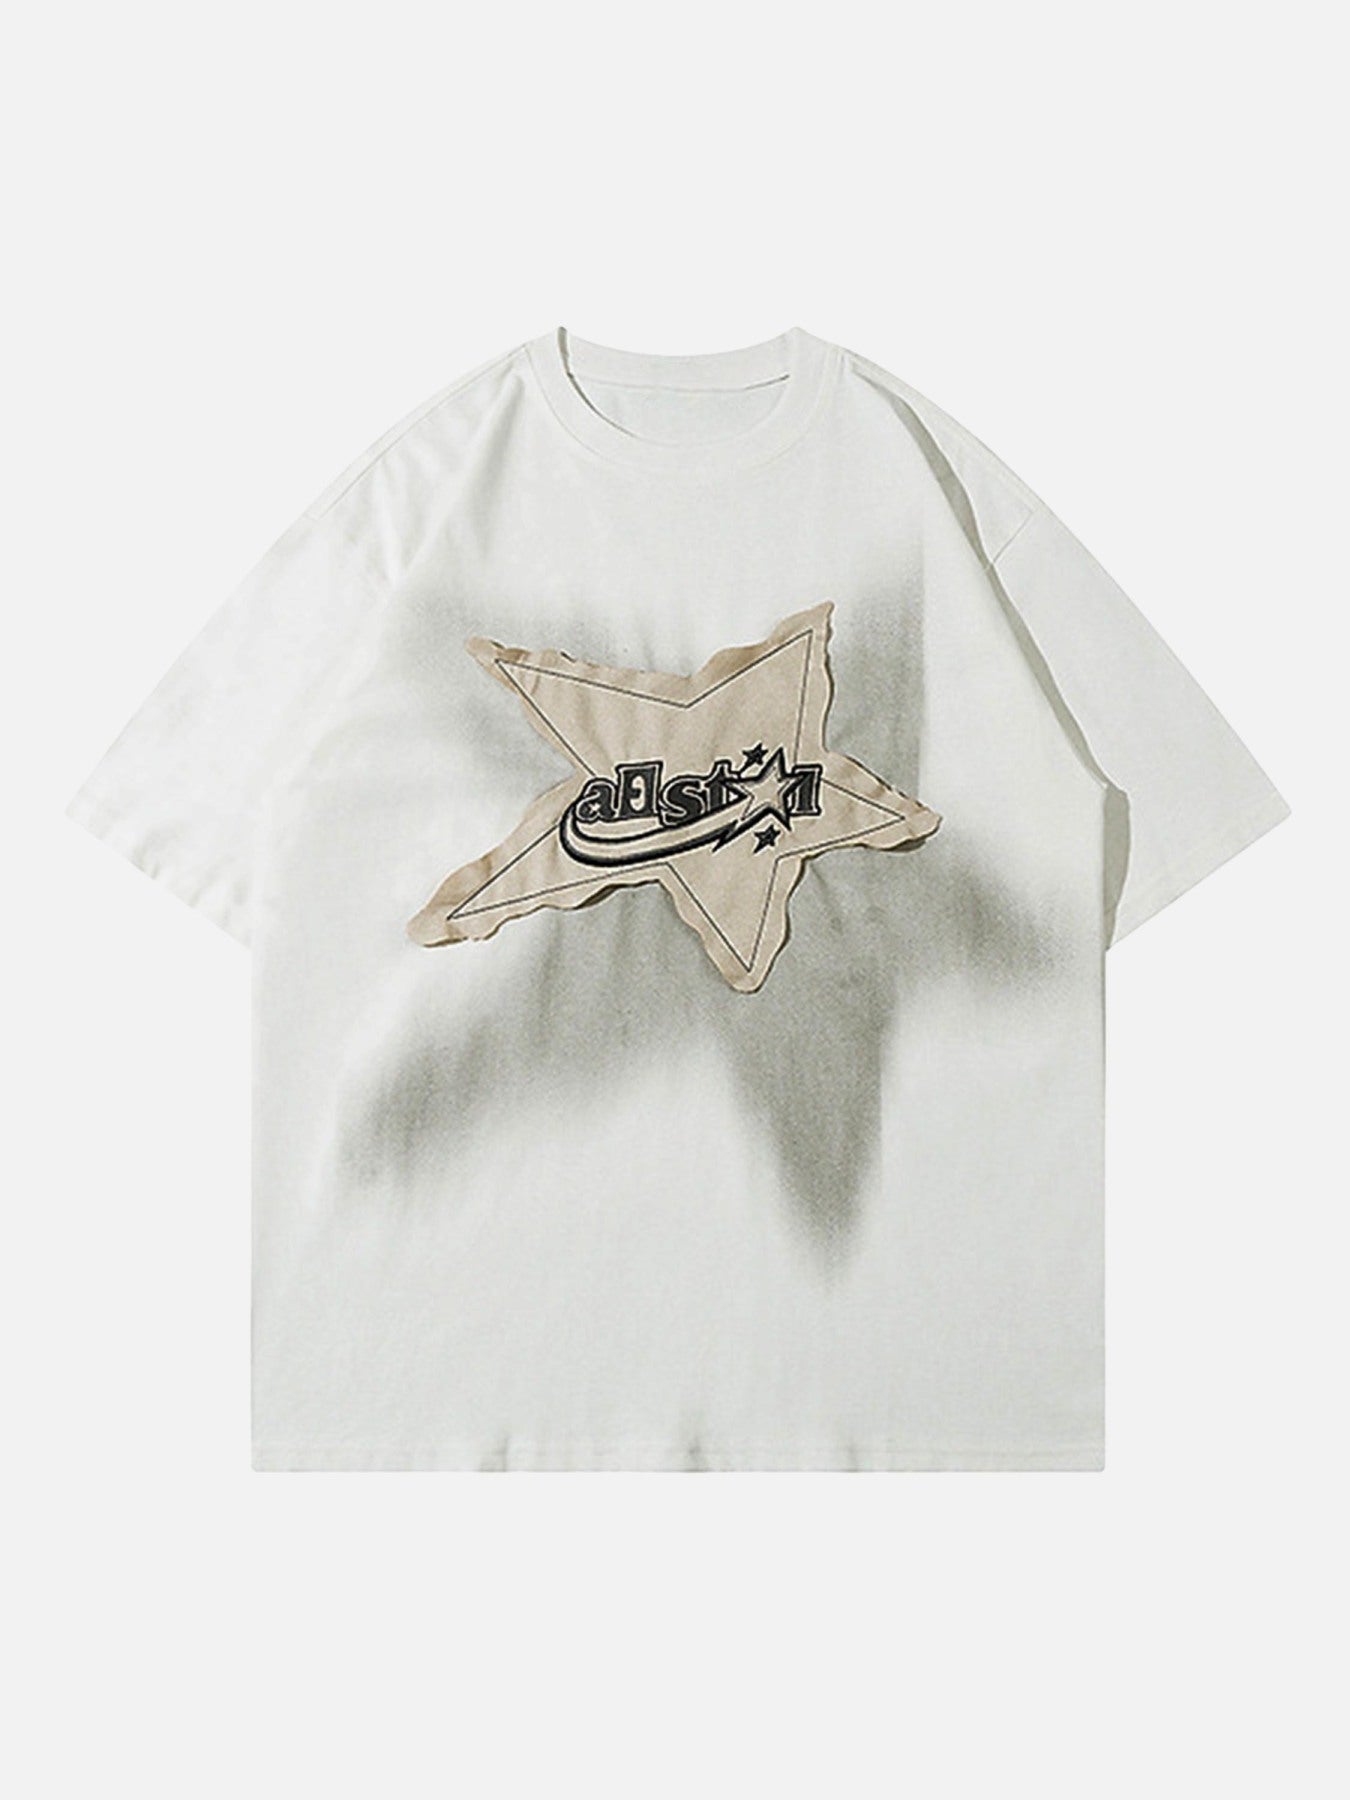 The Supermade Vintage Star Loose T-Shirt